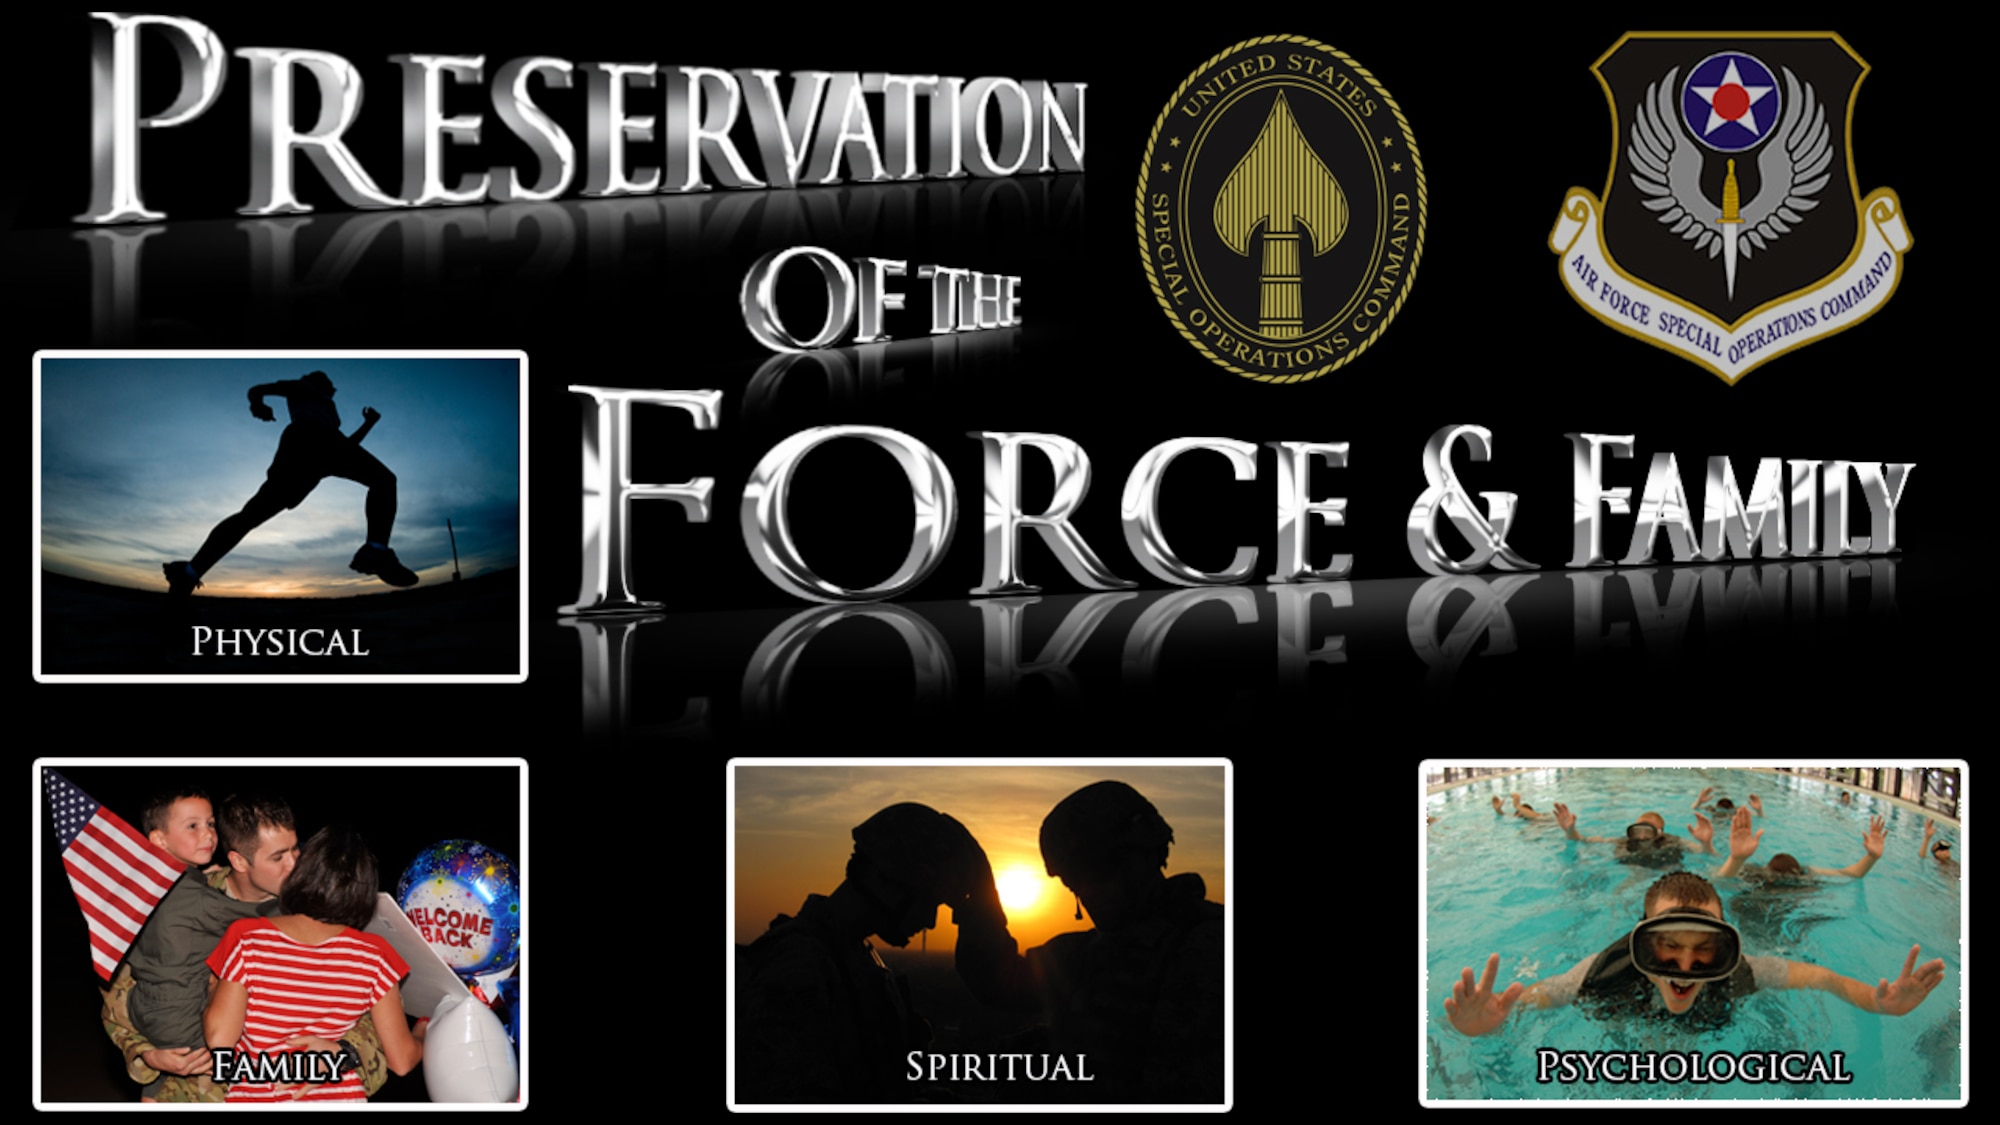 Preservation of the Force and Family